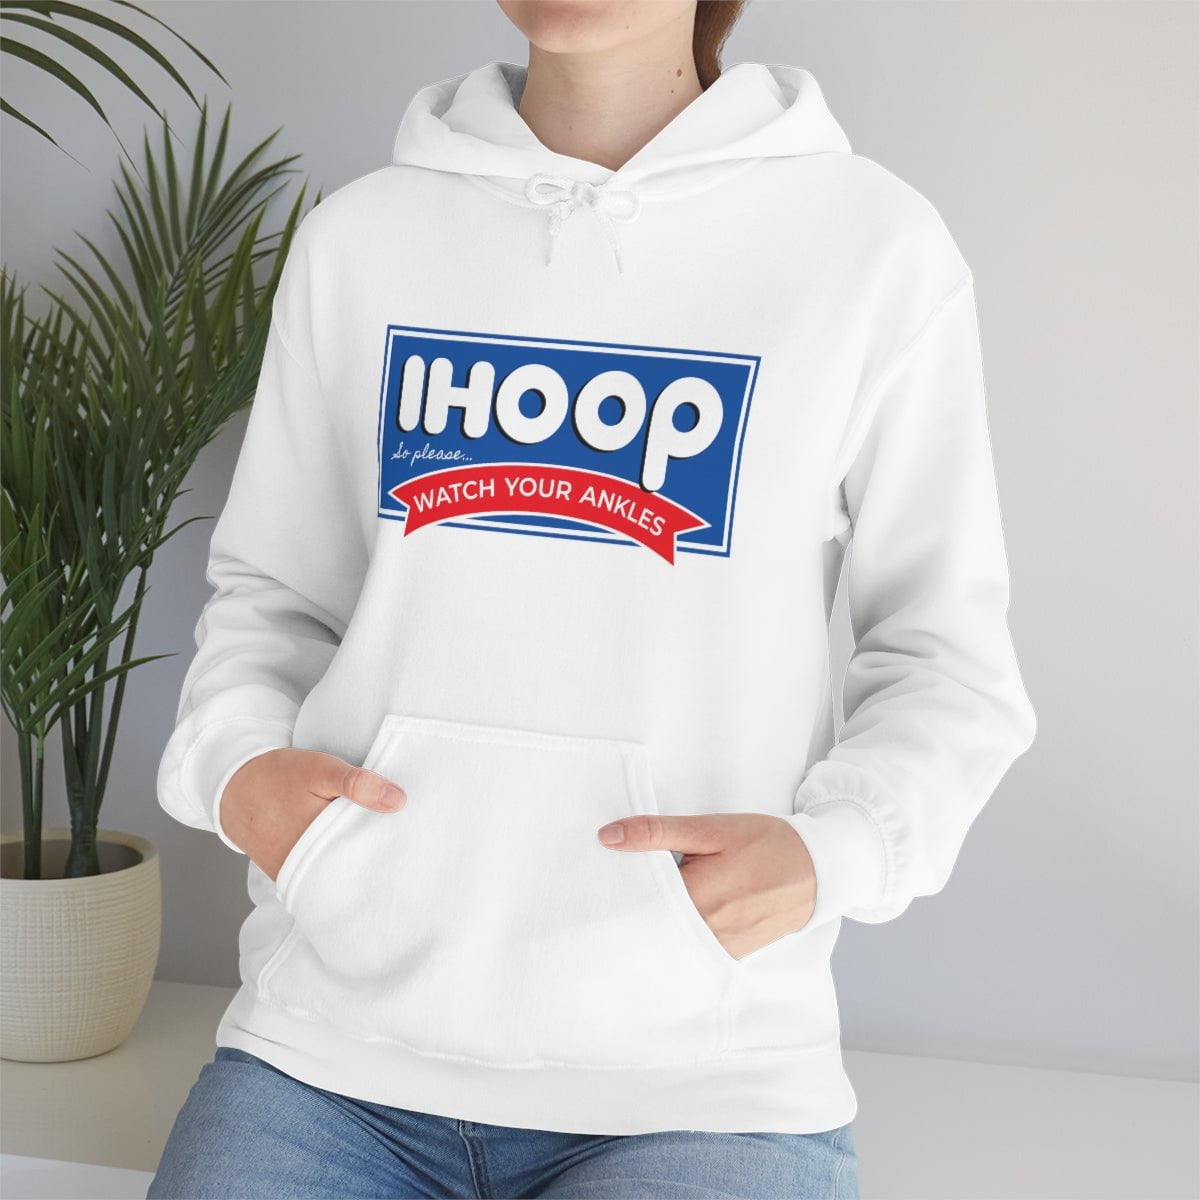 Your Hole Is My Goal Basketball Cool Funny Unisex Hoodies Sweatshirts  Pullovers